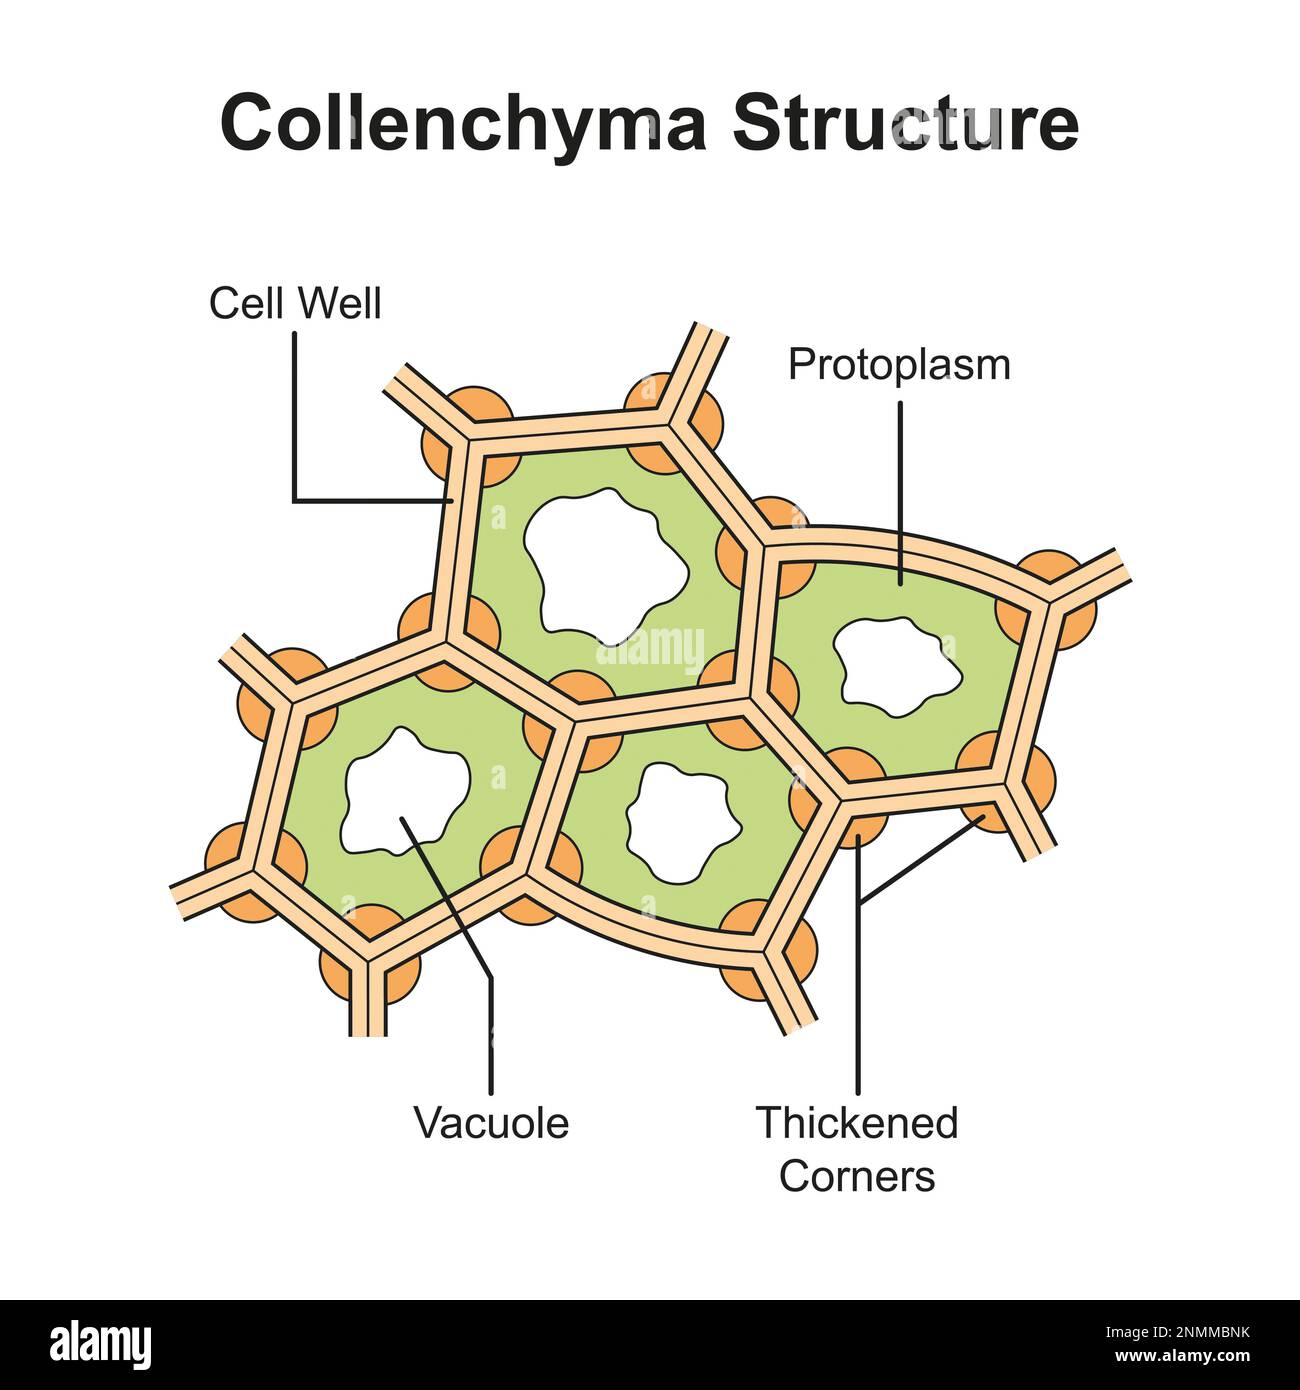 Collenchyma structure, illustration Stock Photo